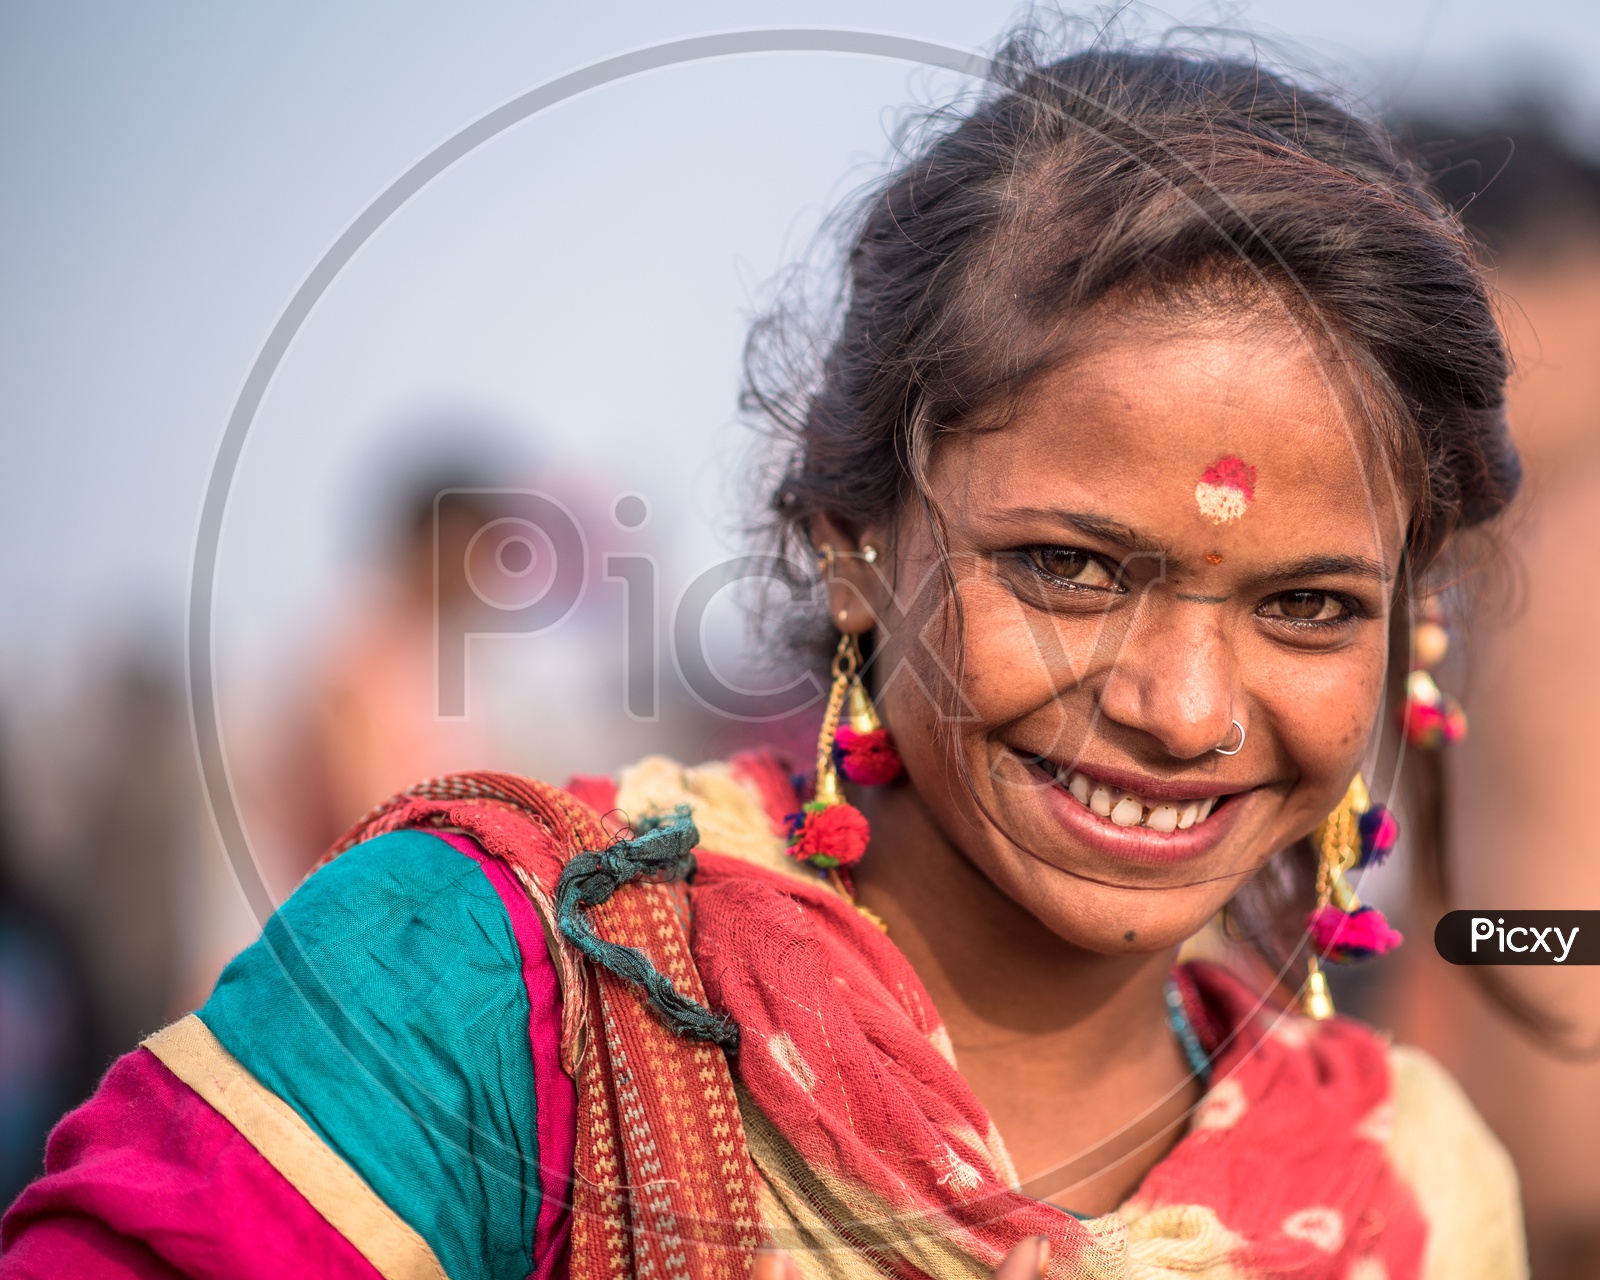 A Young Girl Or Woman Vendor  With a Smiling Face In Kumbh Mela